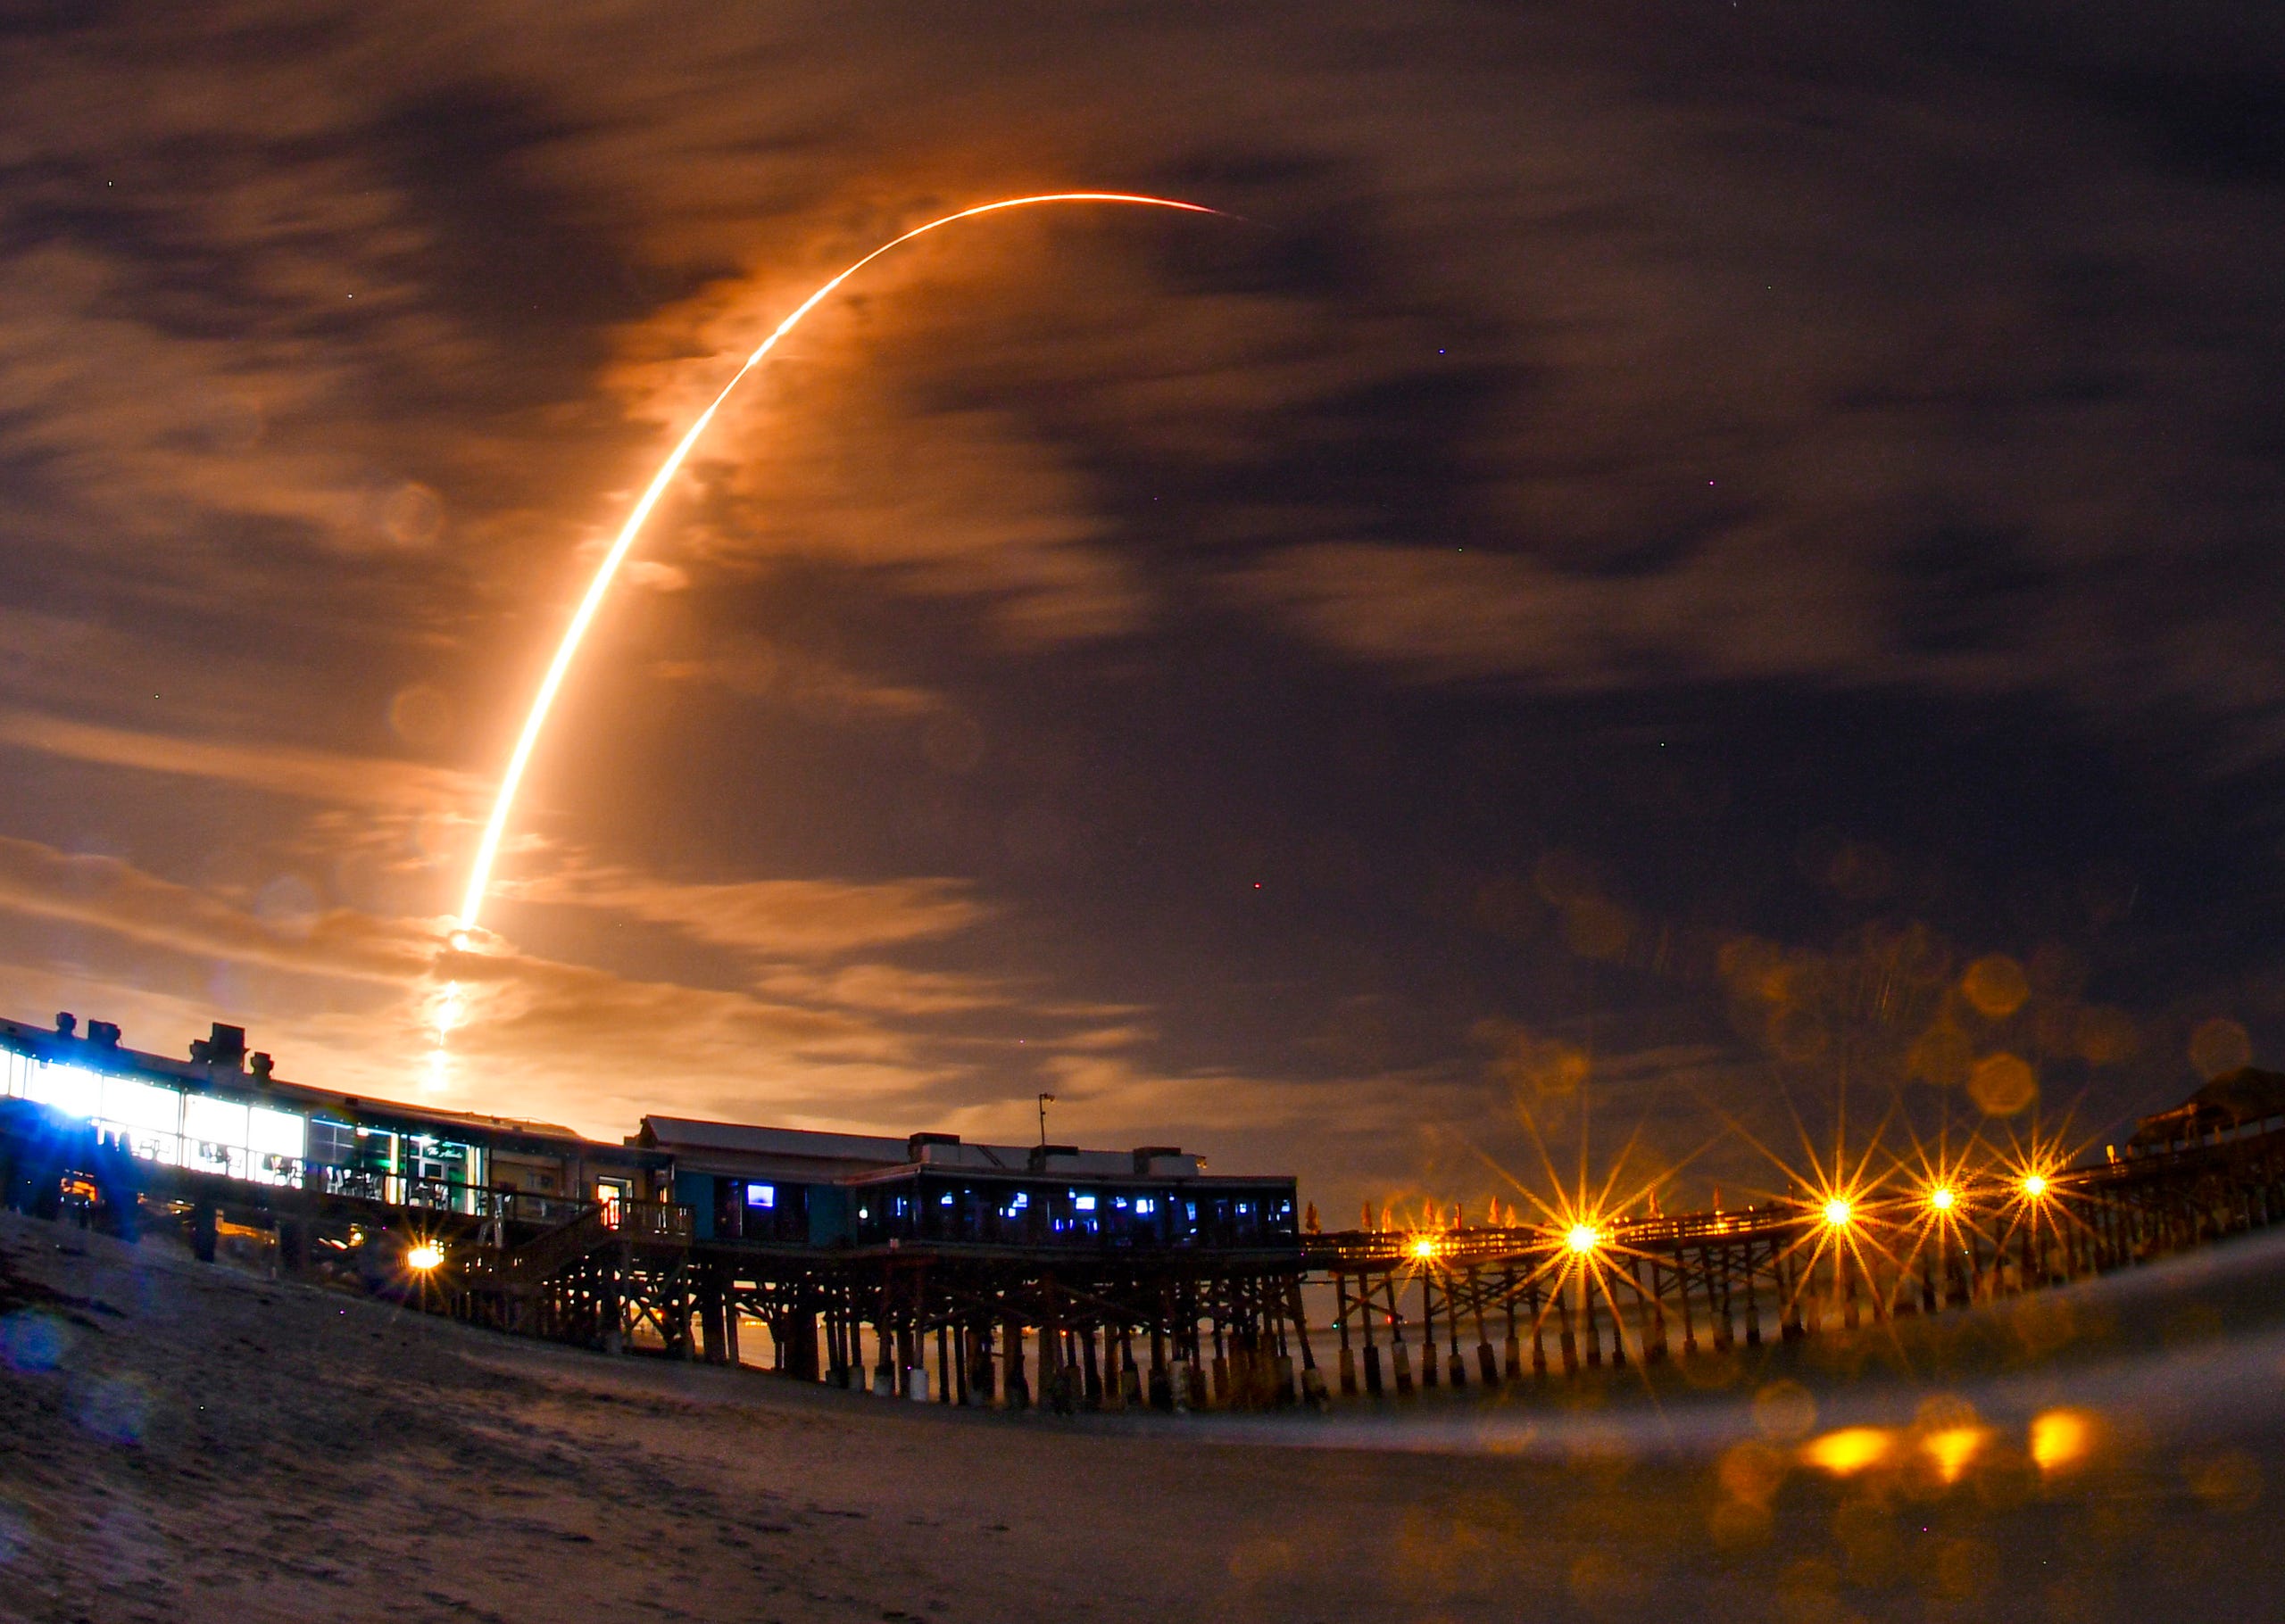 A SpaceX Falcon 9 rocket is seen from the Cocoa Beach Pier as it launches the company's 16th Starlink mission from Cape Canaveral on Tuesday, Nov. 24, 2020.